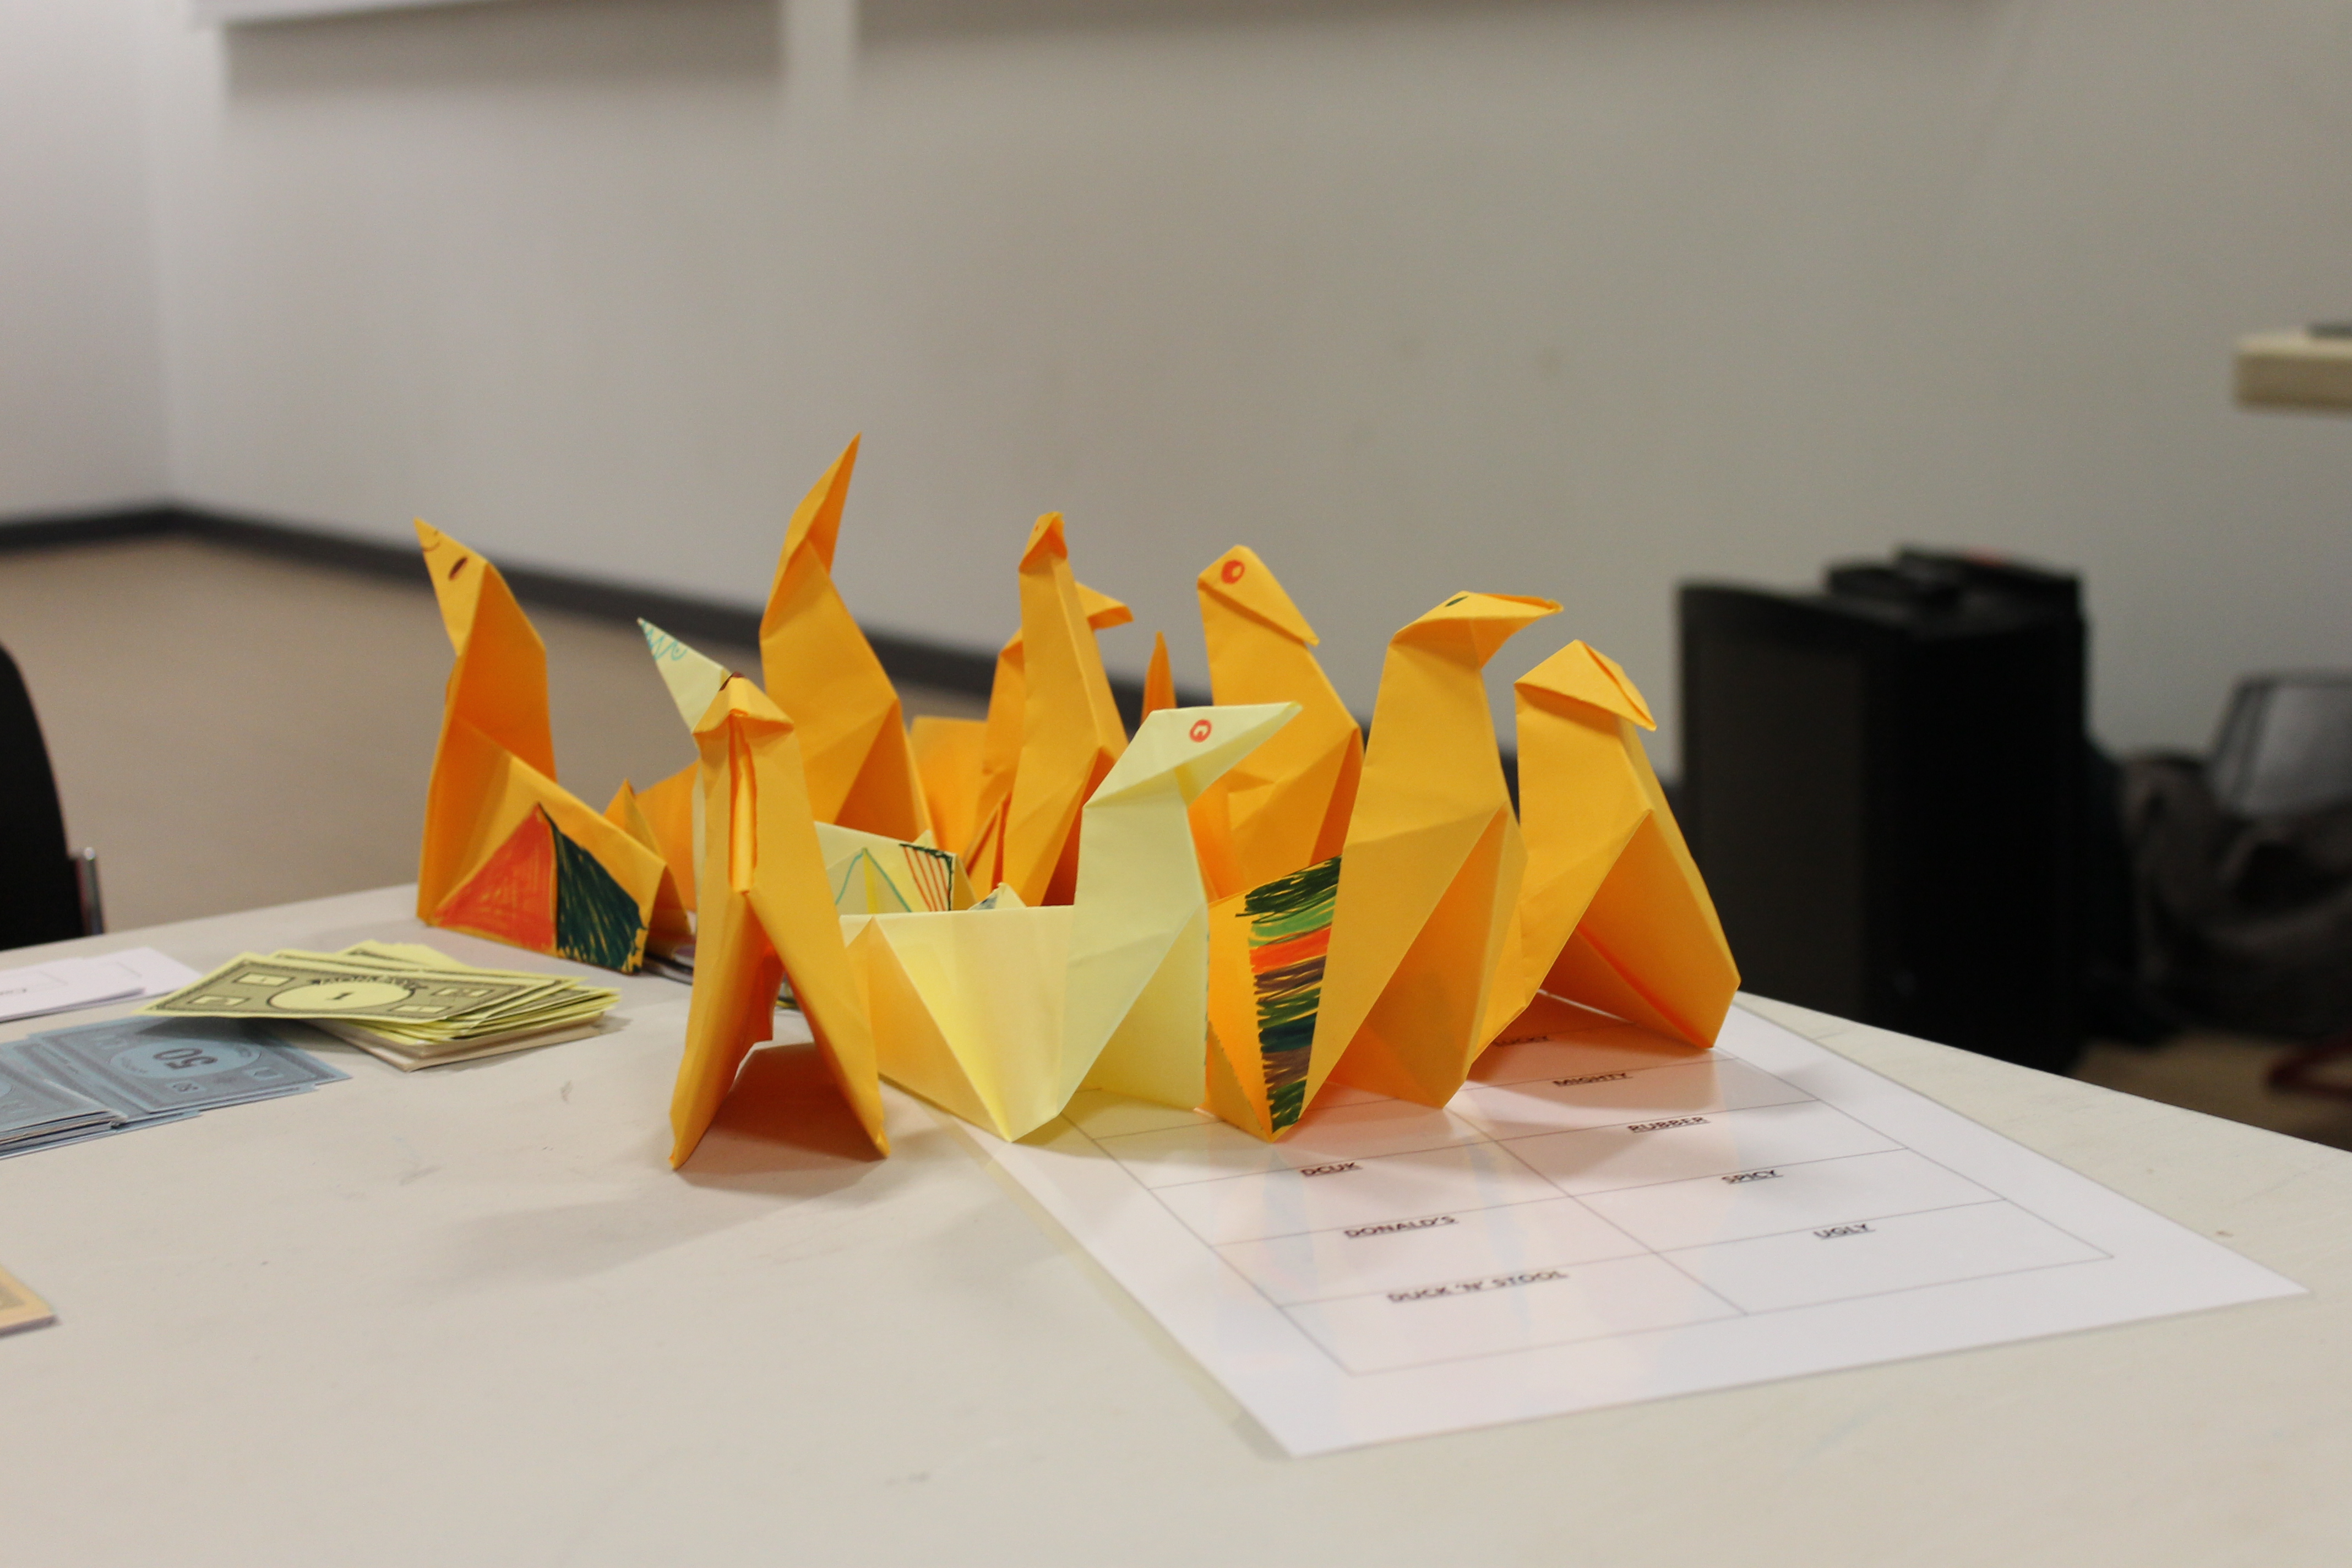 How does making paper ducks inspire students about business?